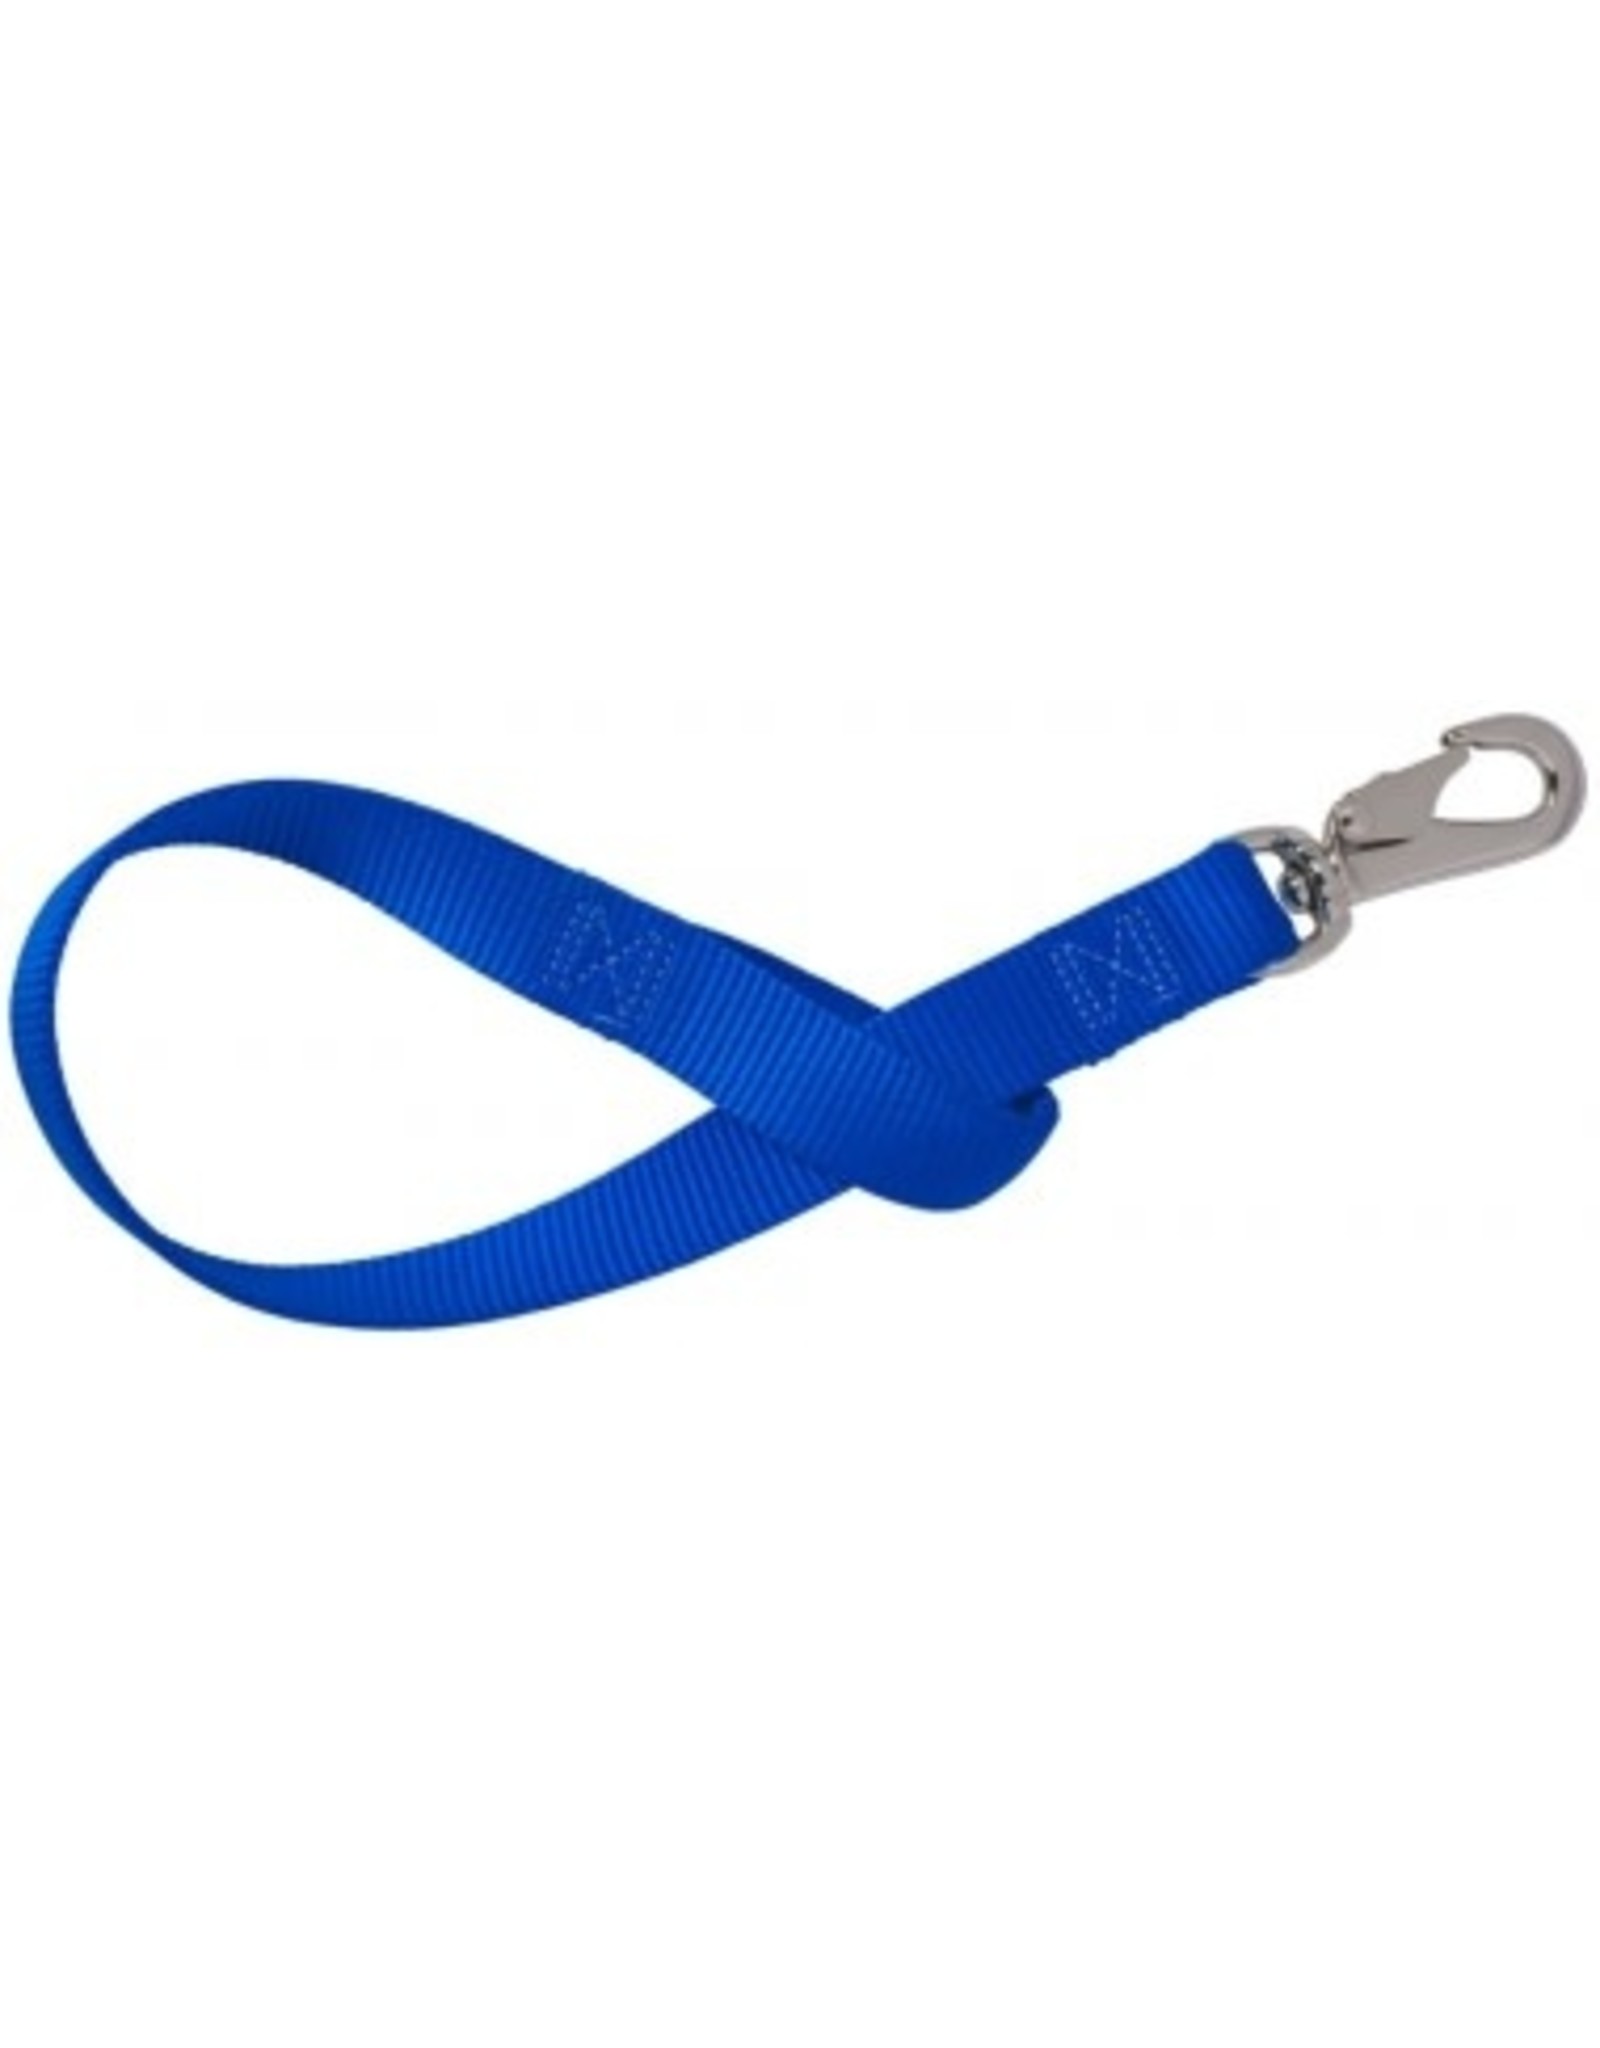 Bucket Strap For Hanging Buckets blue